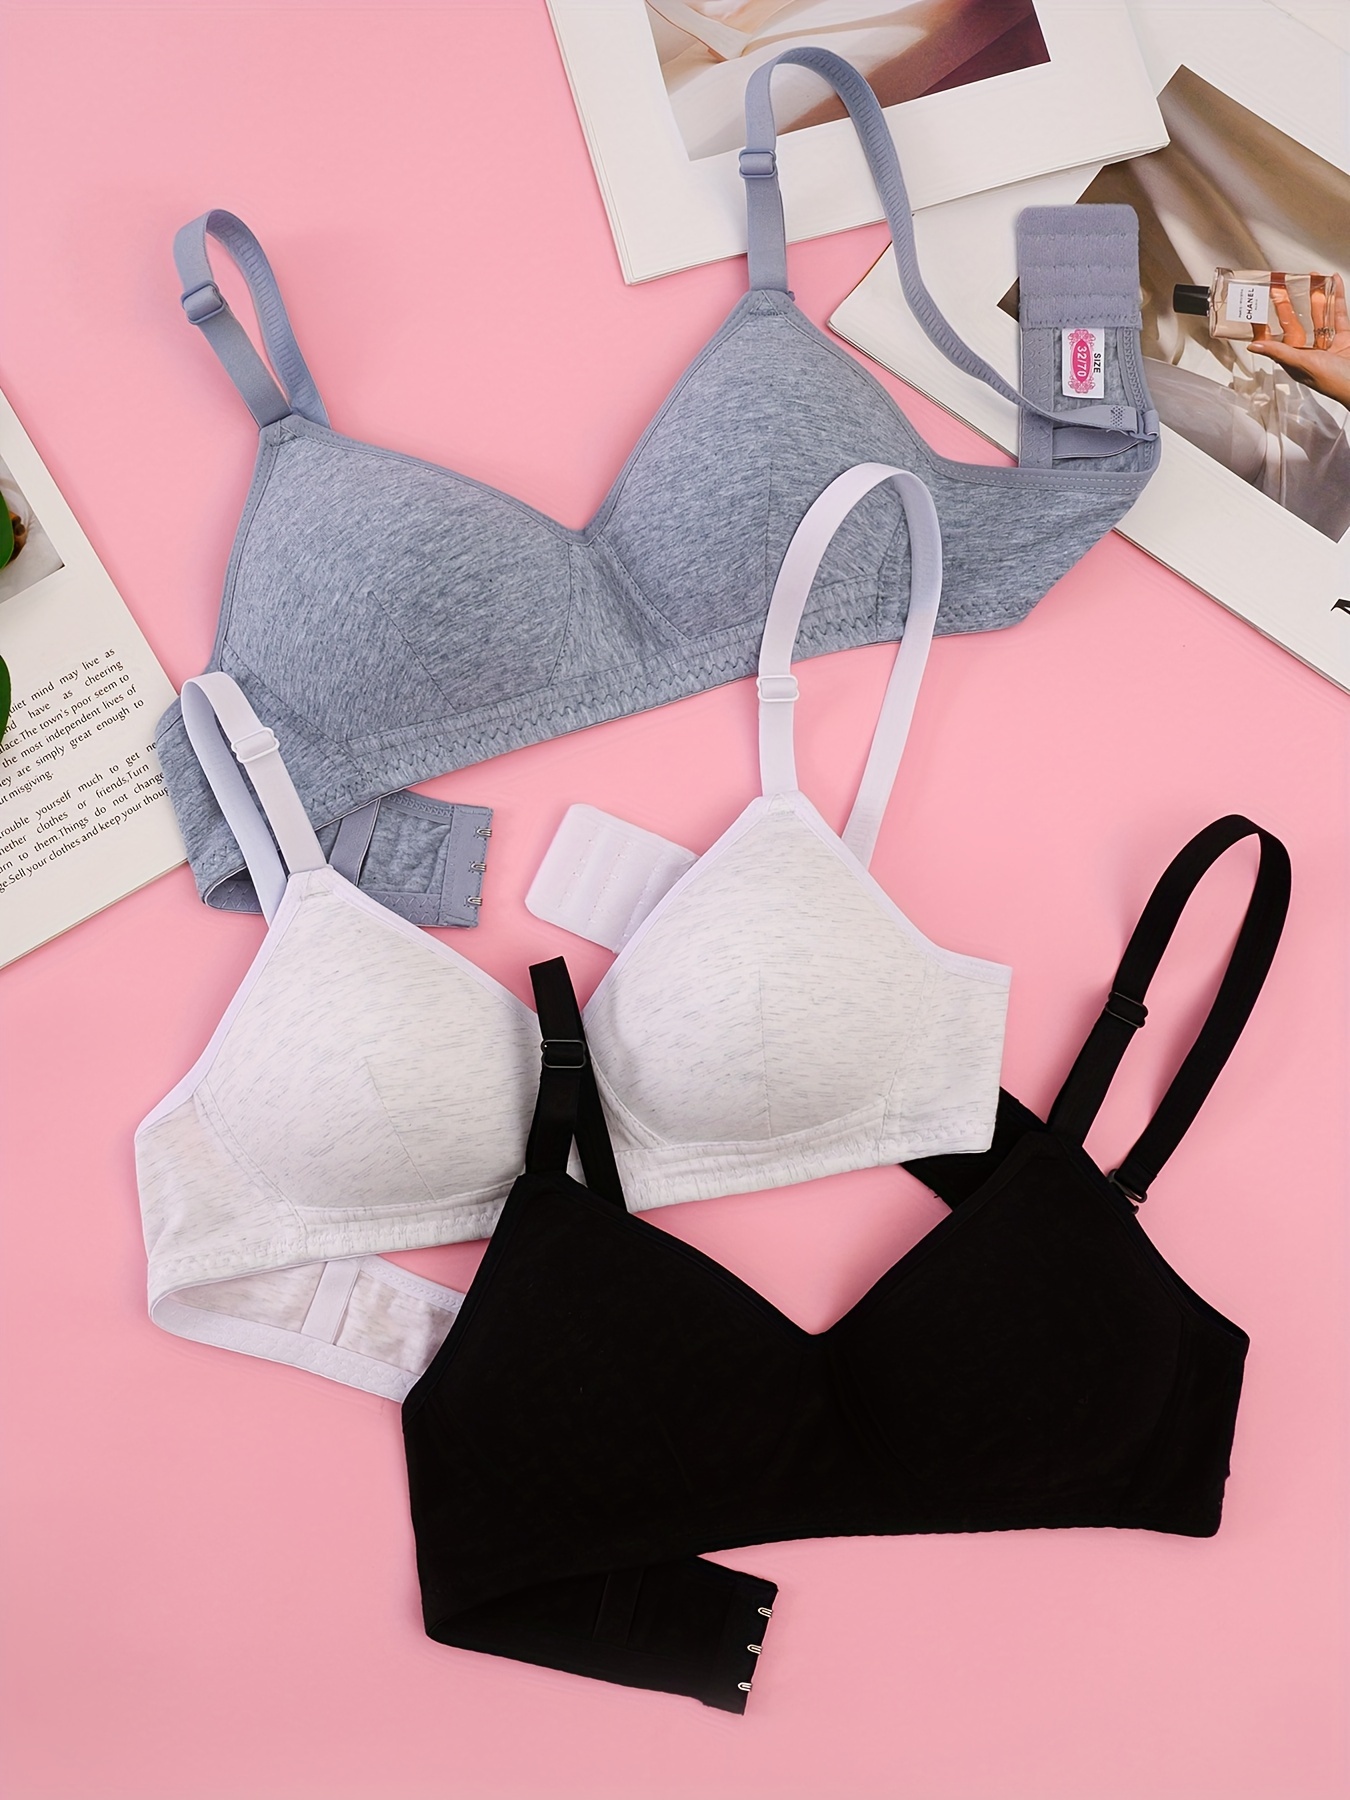 Soft Cotton Strapless Bra For Summer Girls Solid Colors, Ideal For Gym And  Knix Underwear Bras From Yongyiyi, $10.7